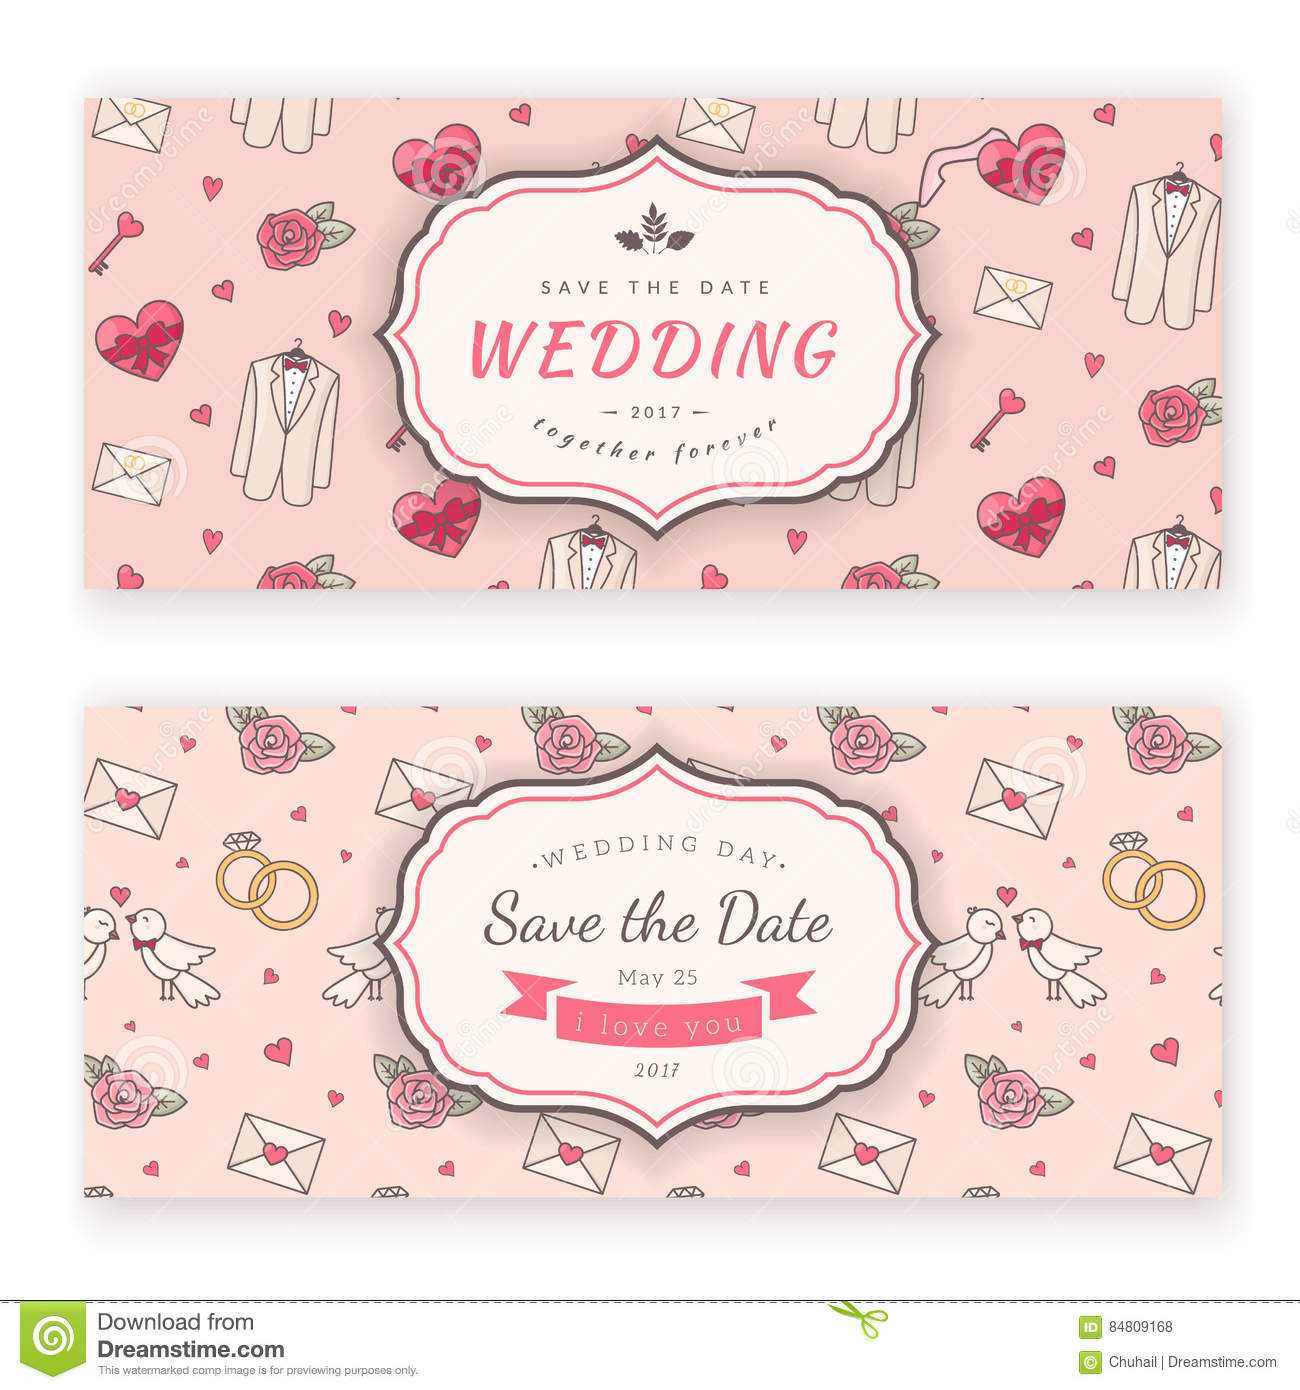 Wedding Banner Template. Stock Vector. Illustration Of With Regard To Wedding Banner Design Templates